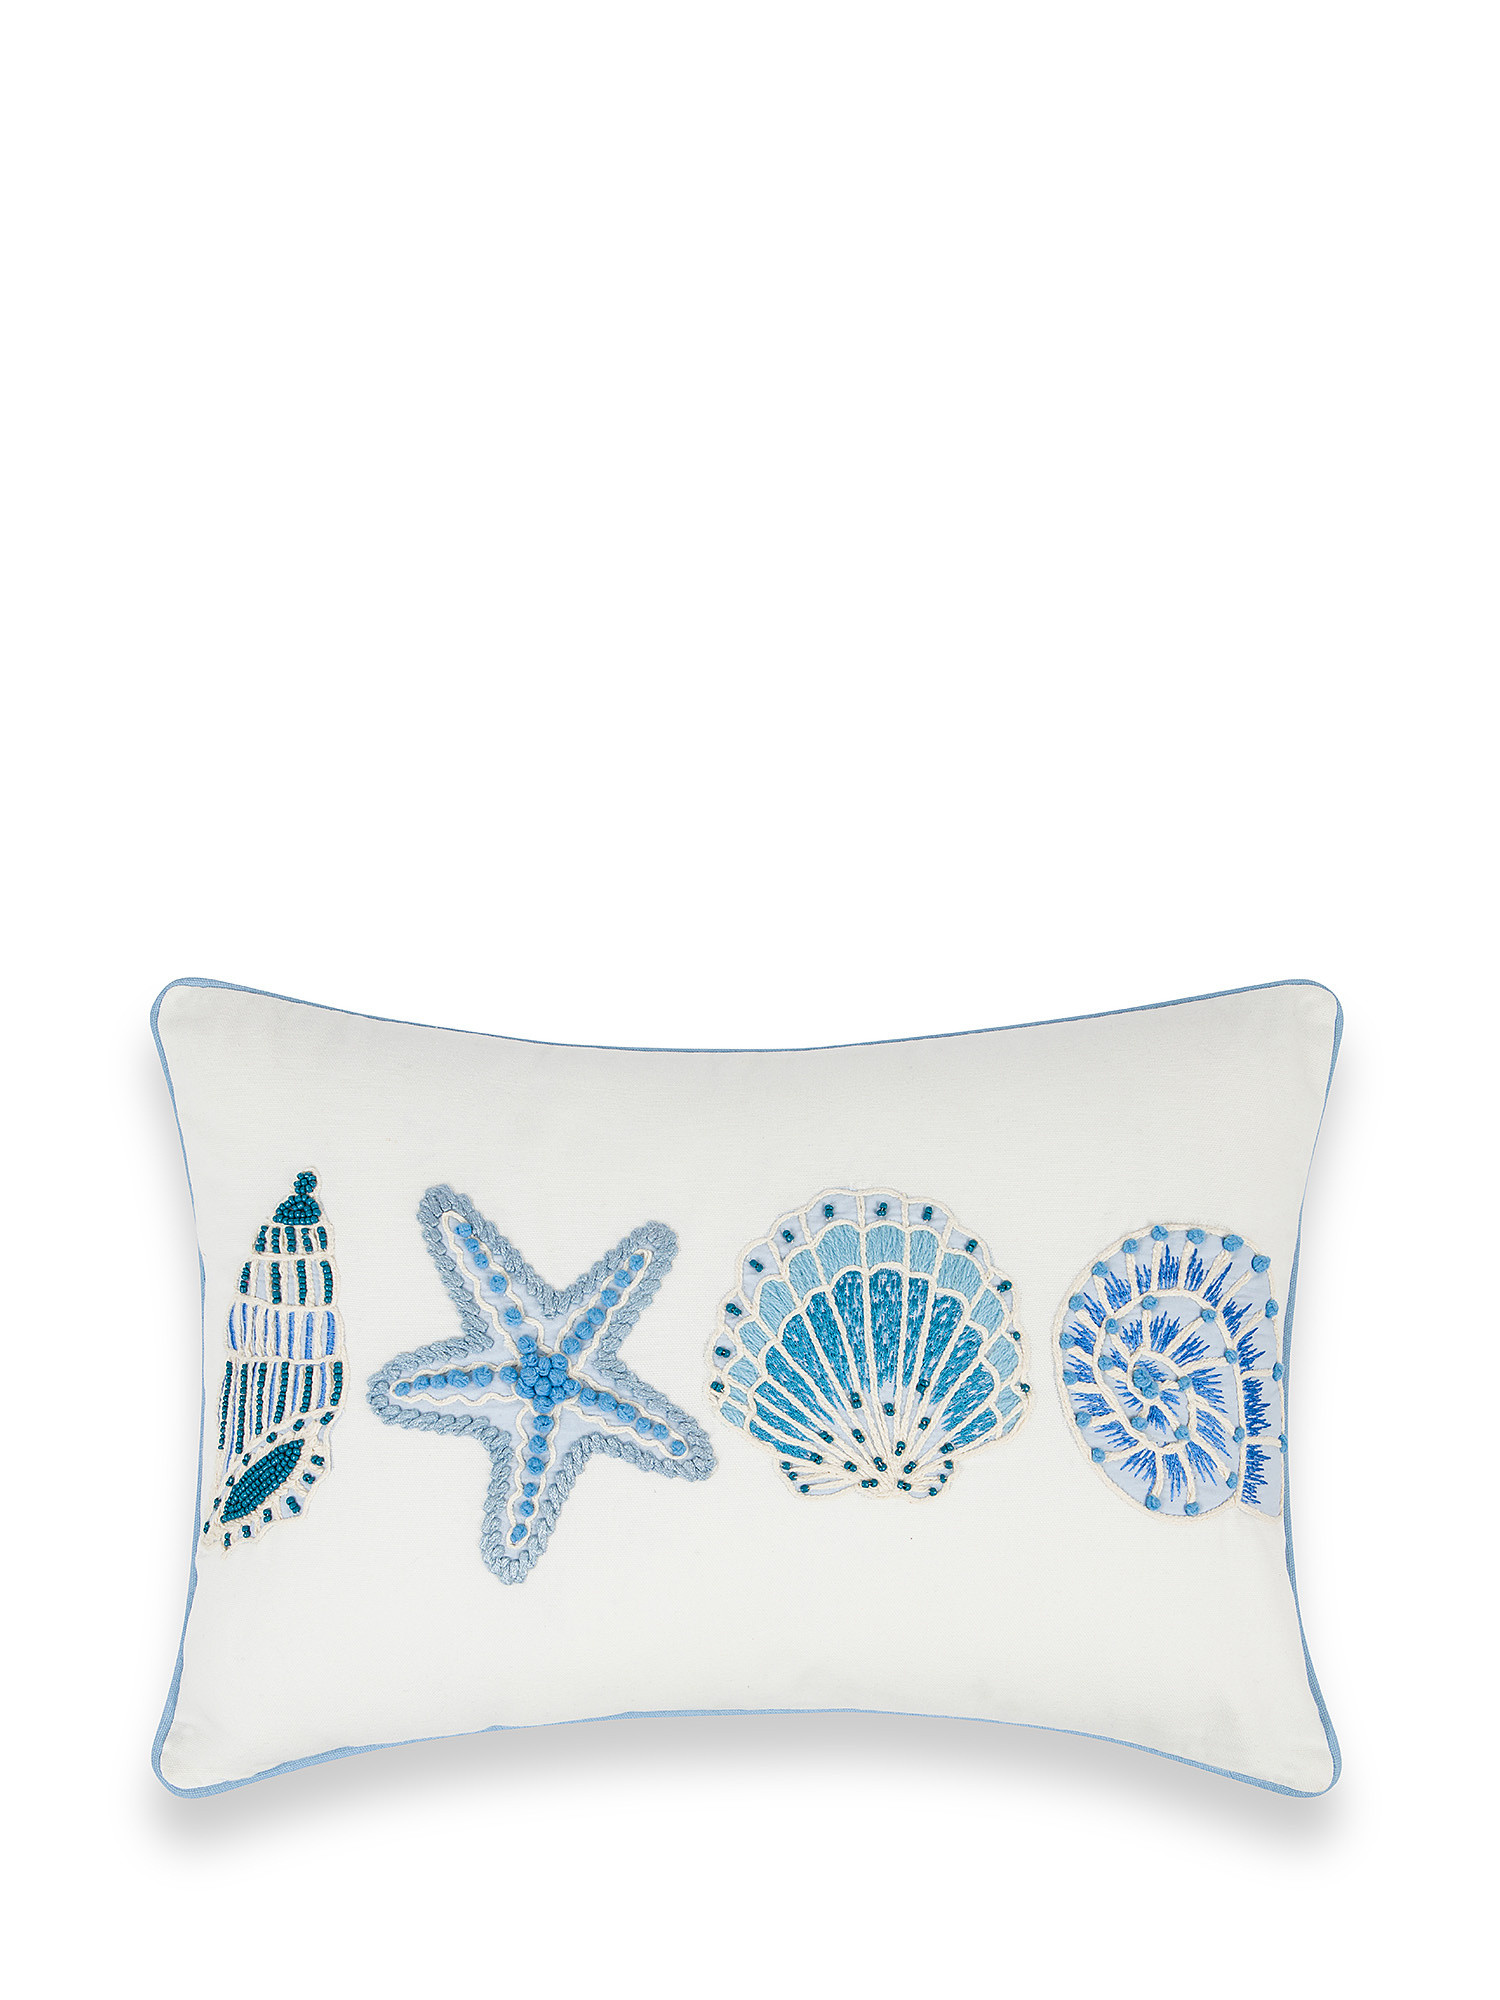 35X50 cm cushion with applications and embroidery, White / Blue, large image number 0